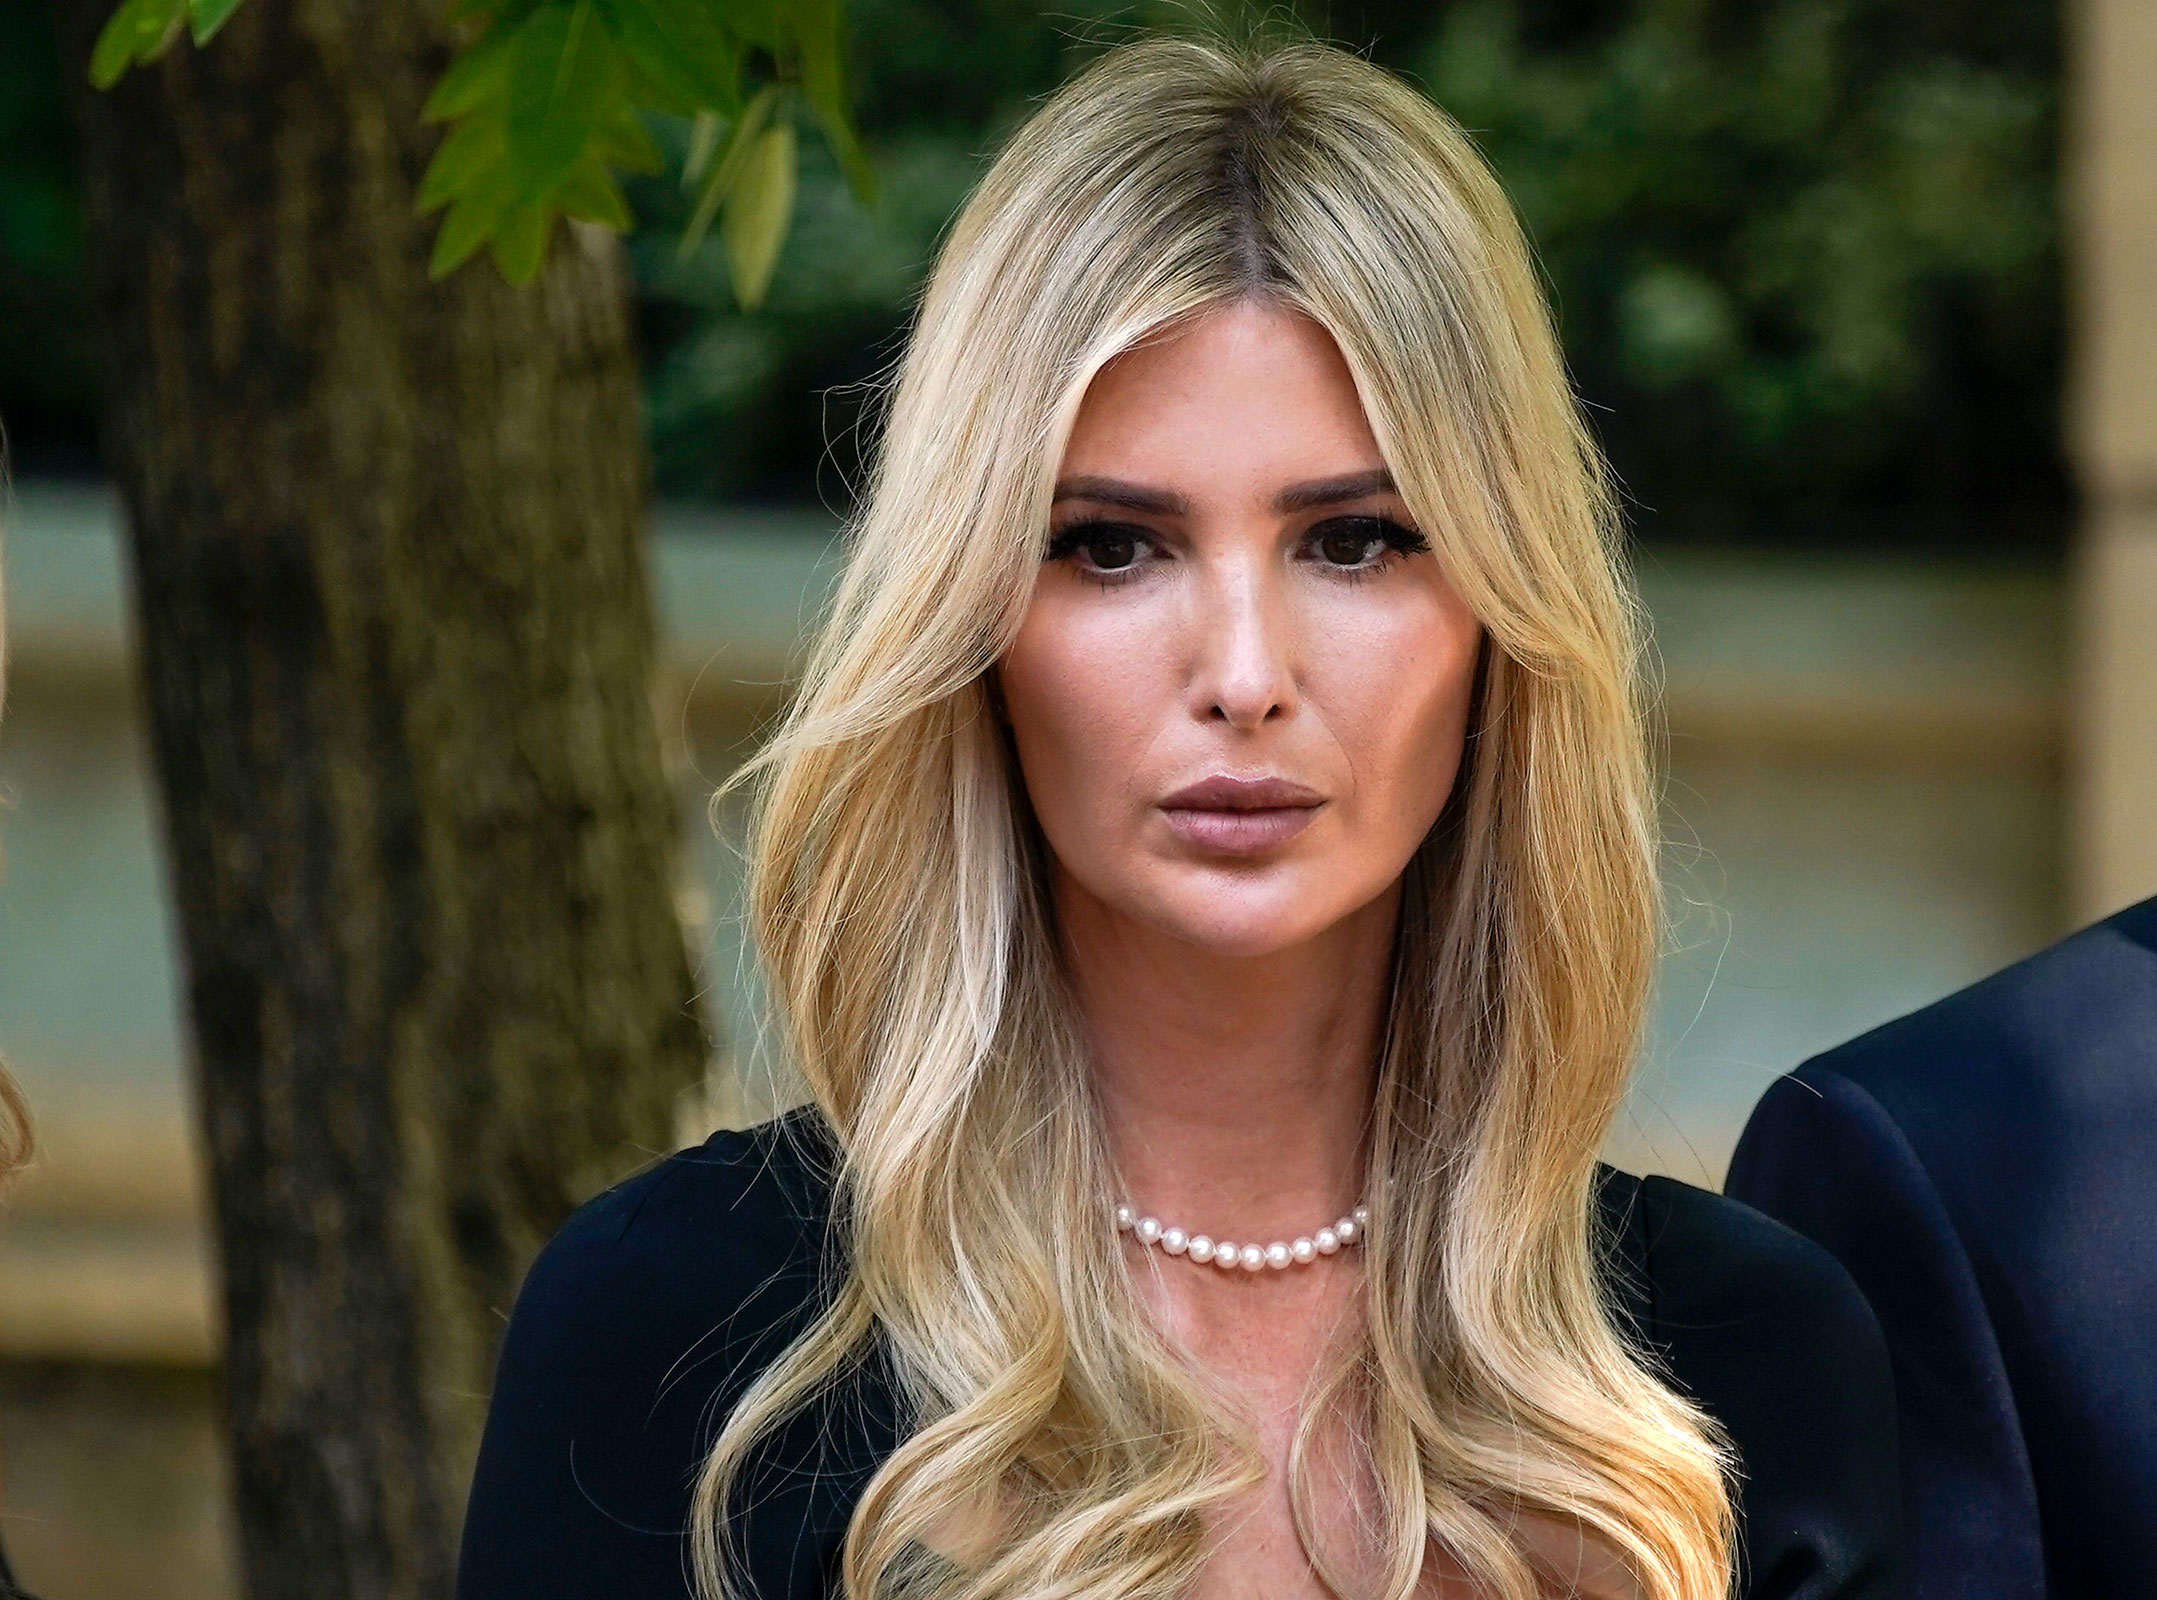 In this July 2022 photo, Ivanka Trump arrives for the funeral of Ivana Trump, in New York.